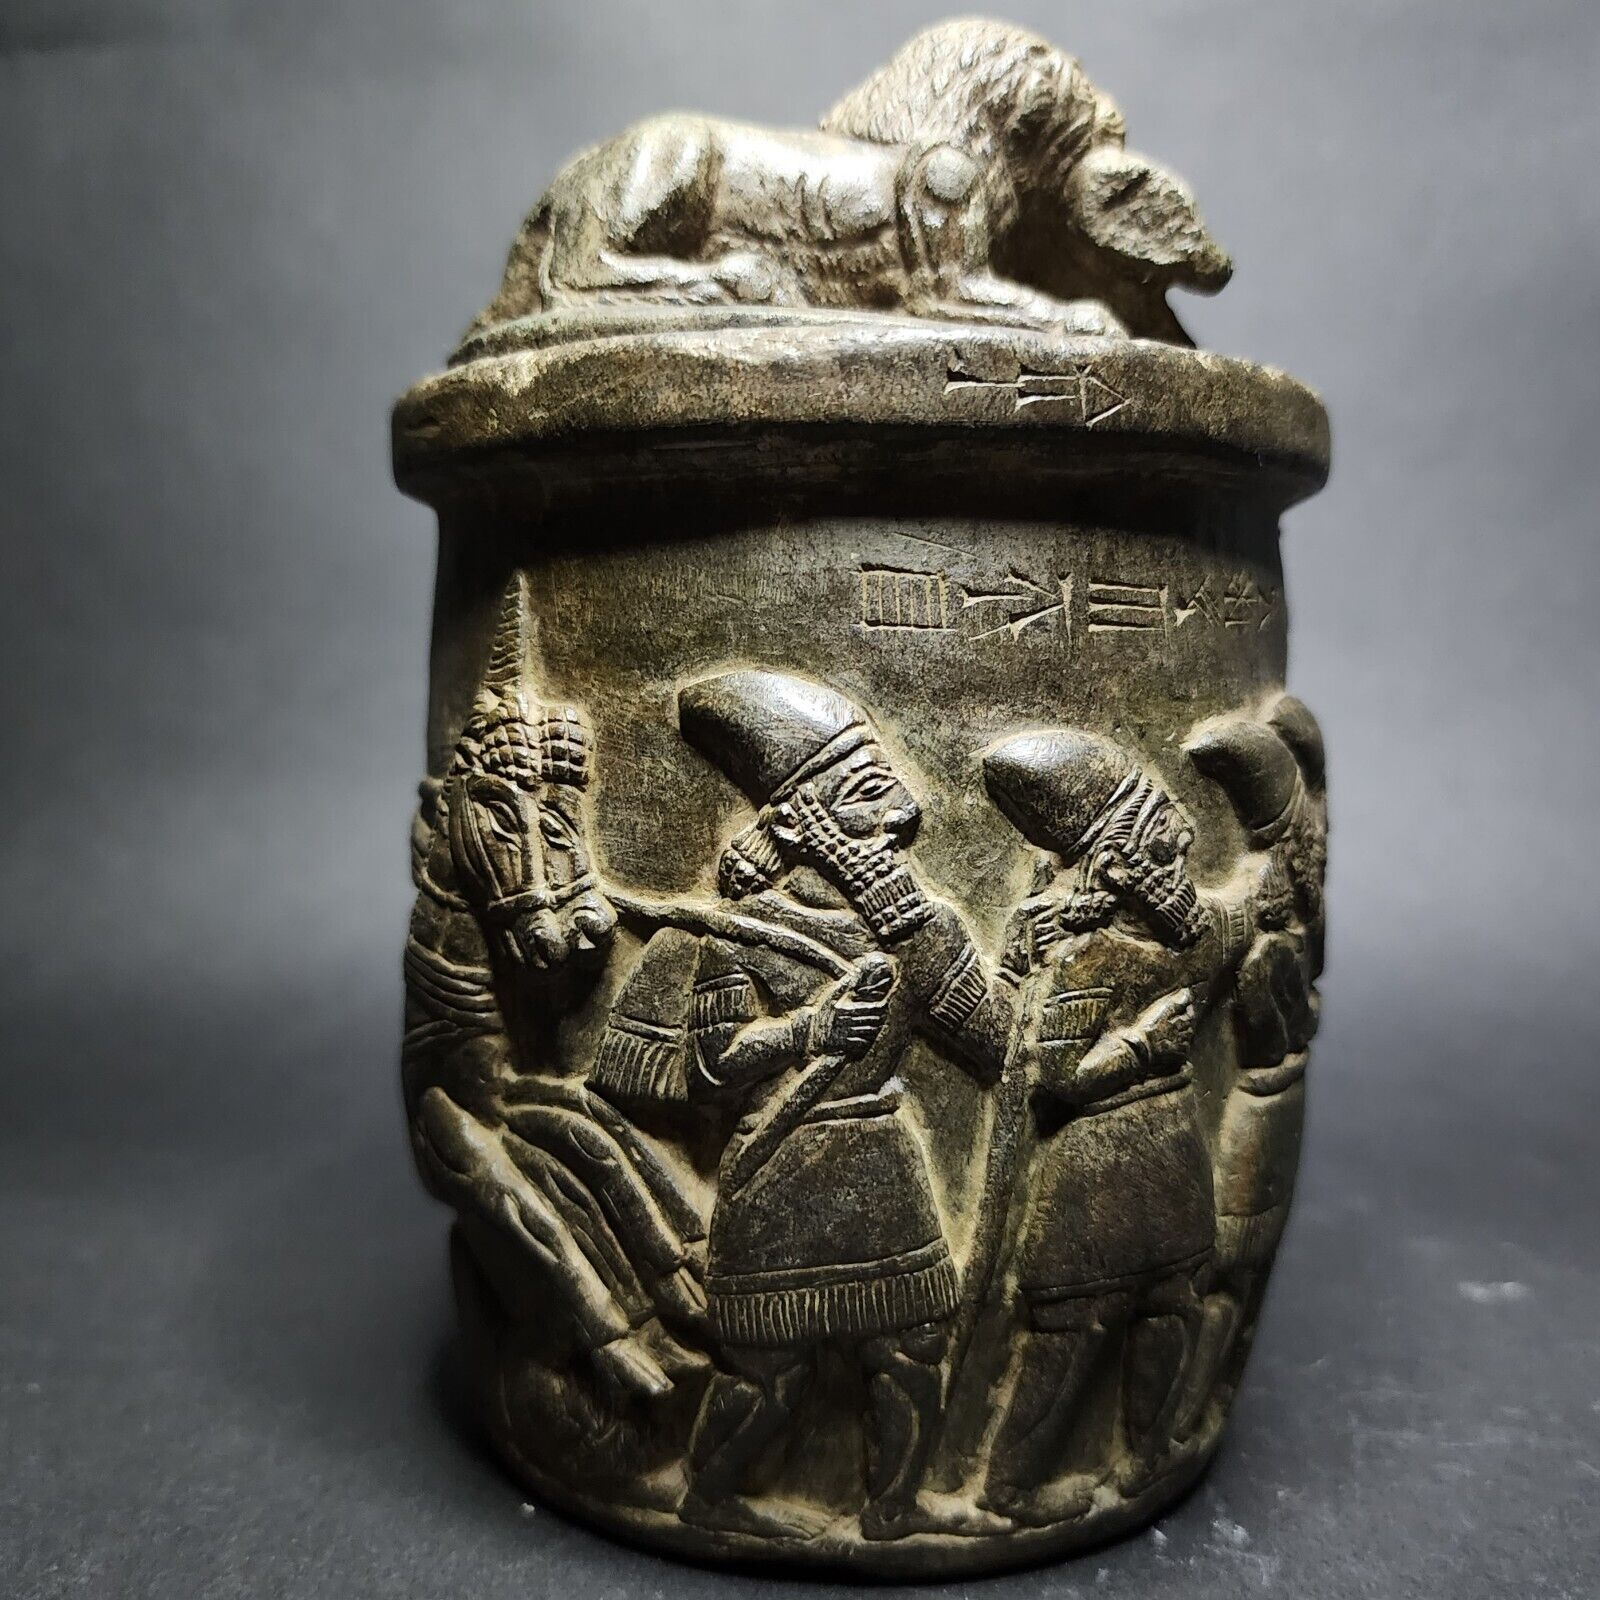 VERY IMPORTANT AND RARE NEAE EASTER AN ASSYRIAN STONE VESSEL WITH CAP. CARVED